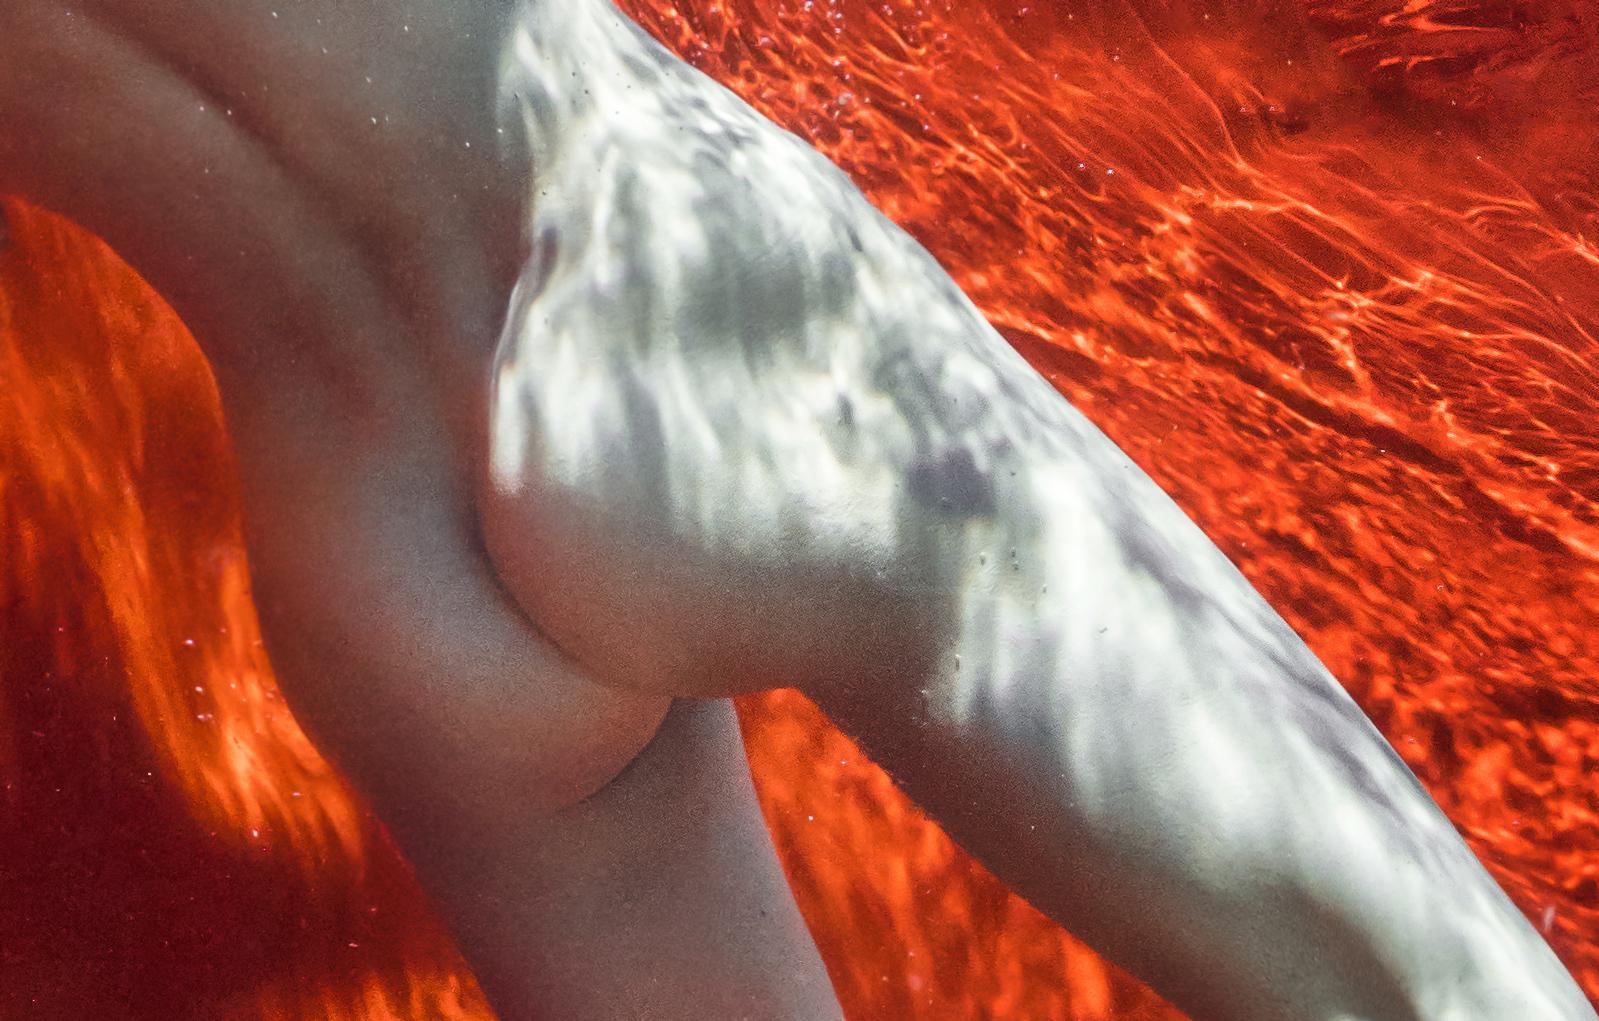 An underwater photograph of a naked young woman diving in a pool in front of bright red background.

There is no rules for luck.  I was sure the new girl would need practice and practice - and was wrong. She was just perfect from the first second